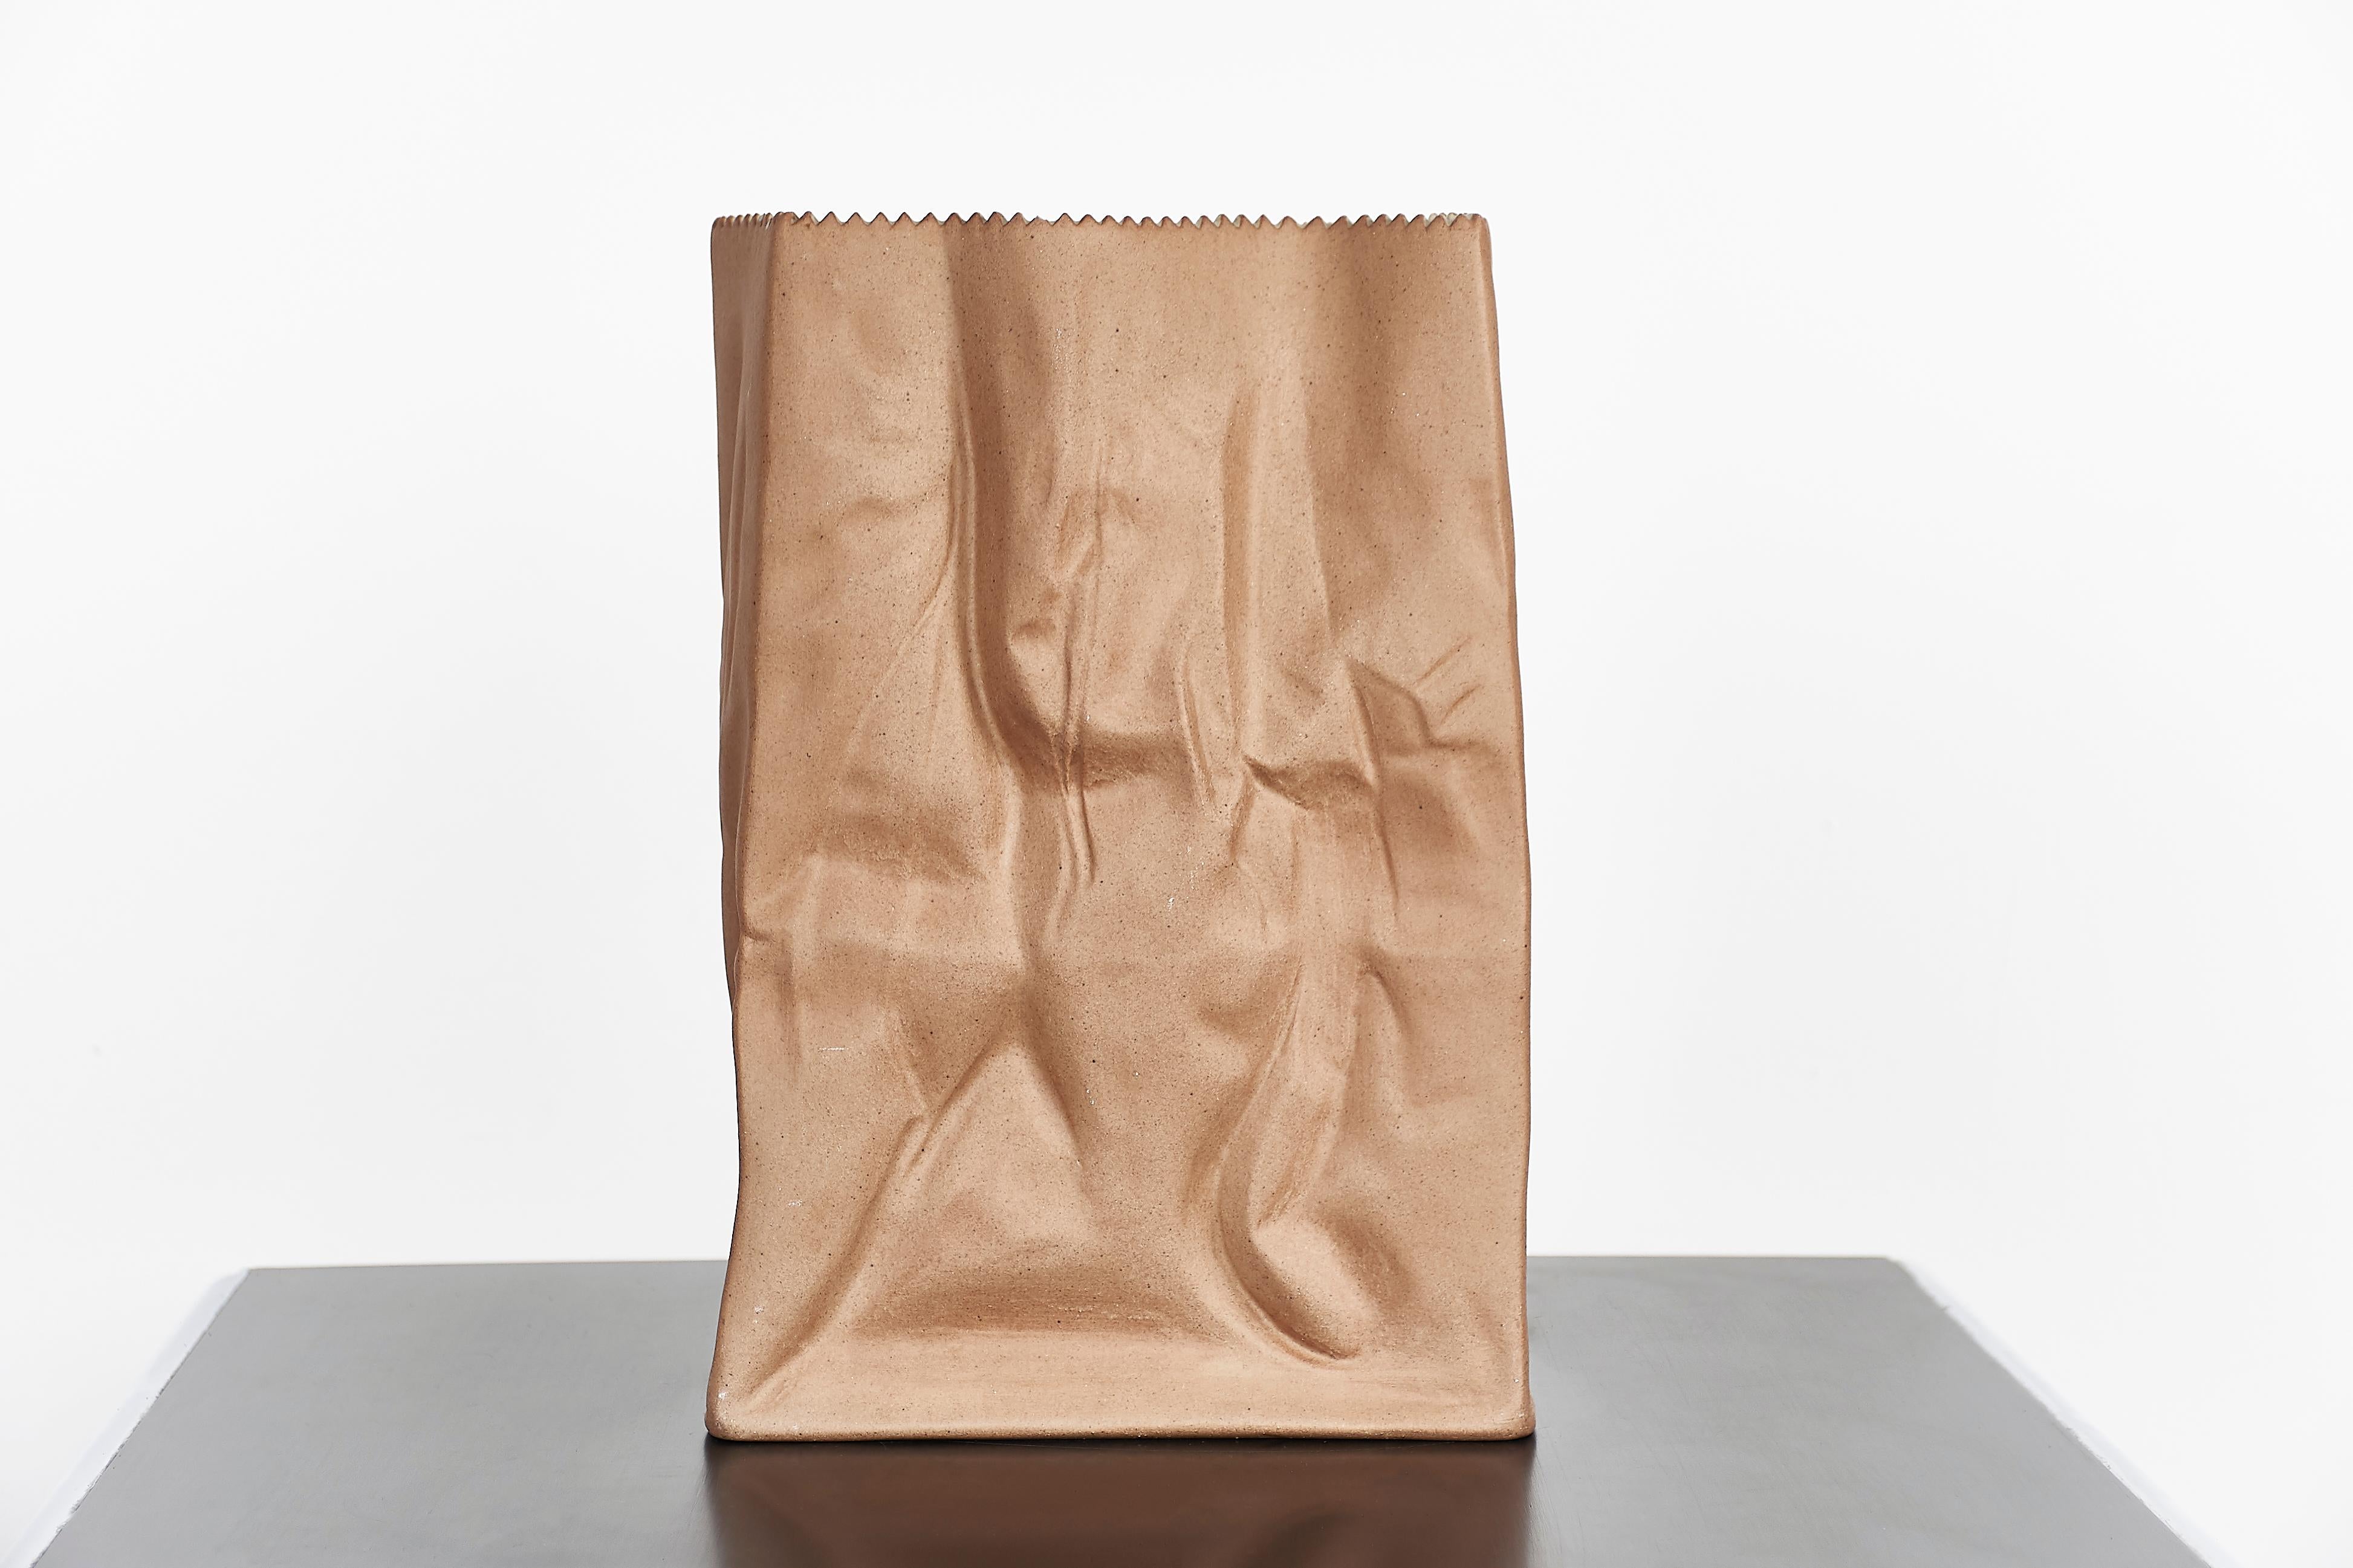 Paper or plastic or…Wirkkala’s fun and whimsical 1977 Pop Art take on tromp l’oeil, something that is not what it appears to be. Here, a used paper bag is actually a porcelain vase. Kraft paper brown with a serrated top edge. Perennially popular and